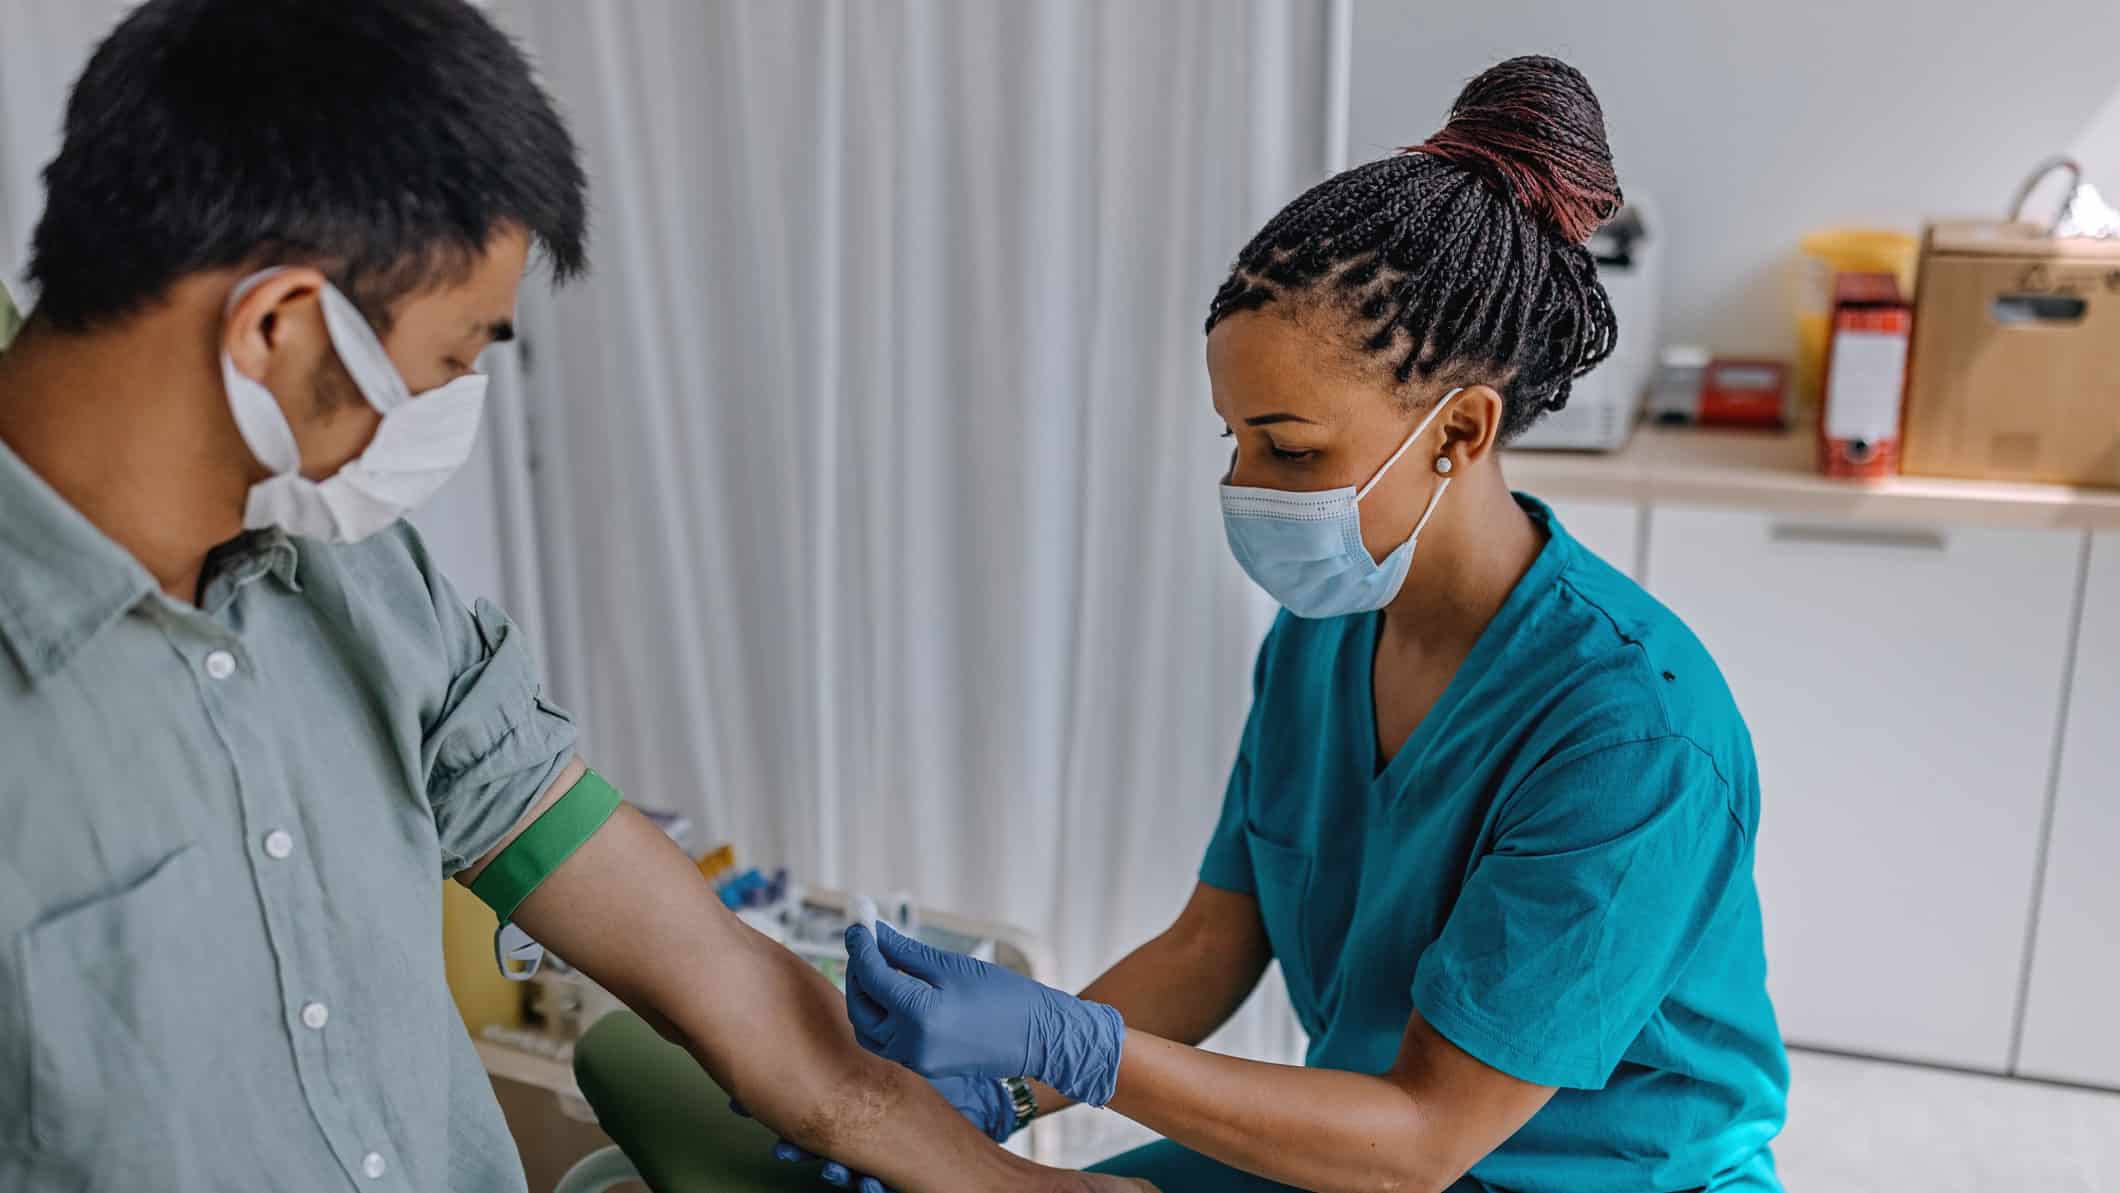 a nurse wearing a medical mask prepares a patient for a blood donation in a surgical setting.